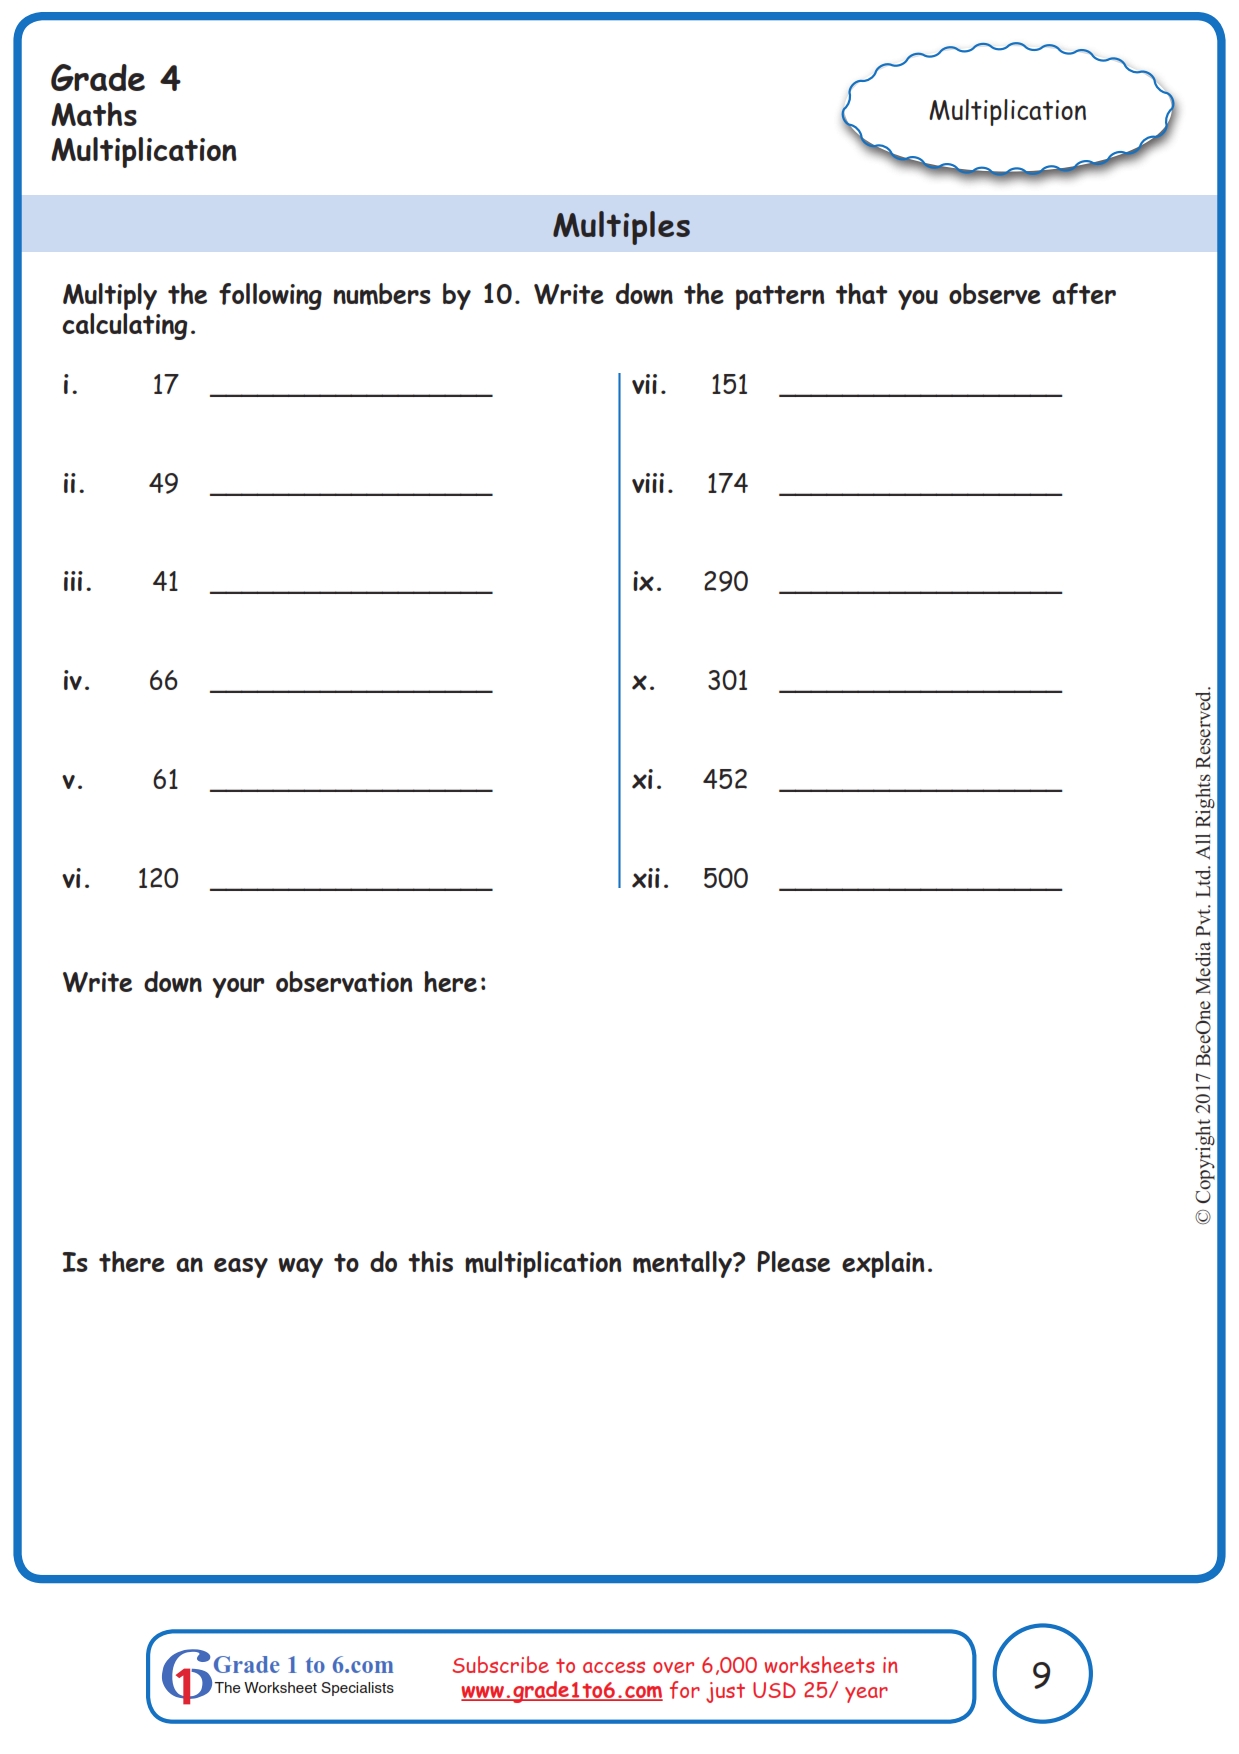  Multiples Worksheets www grade1to6